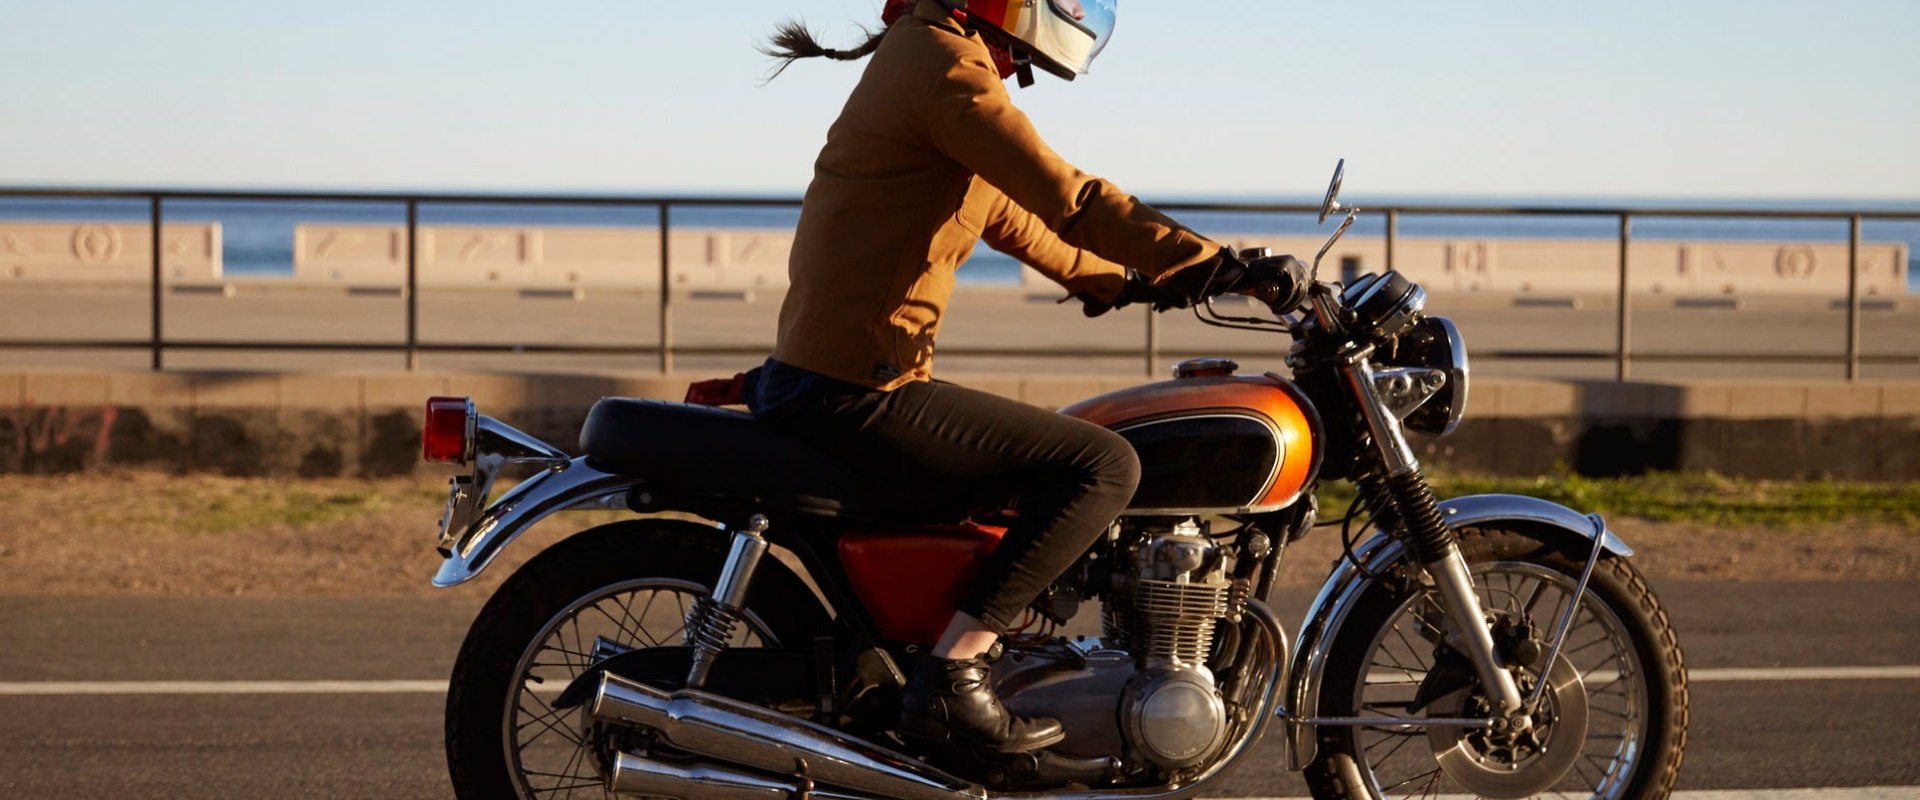 How Much Does Motorcycle Insurance Cost in NYC Per Month?